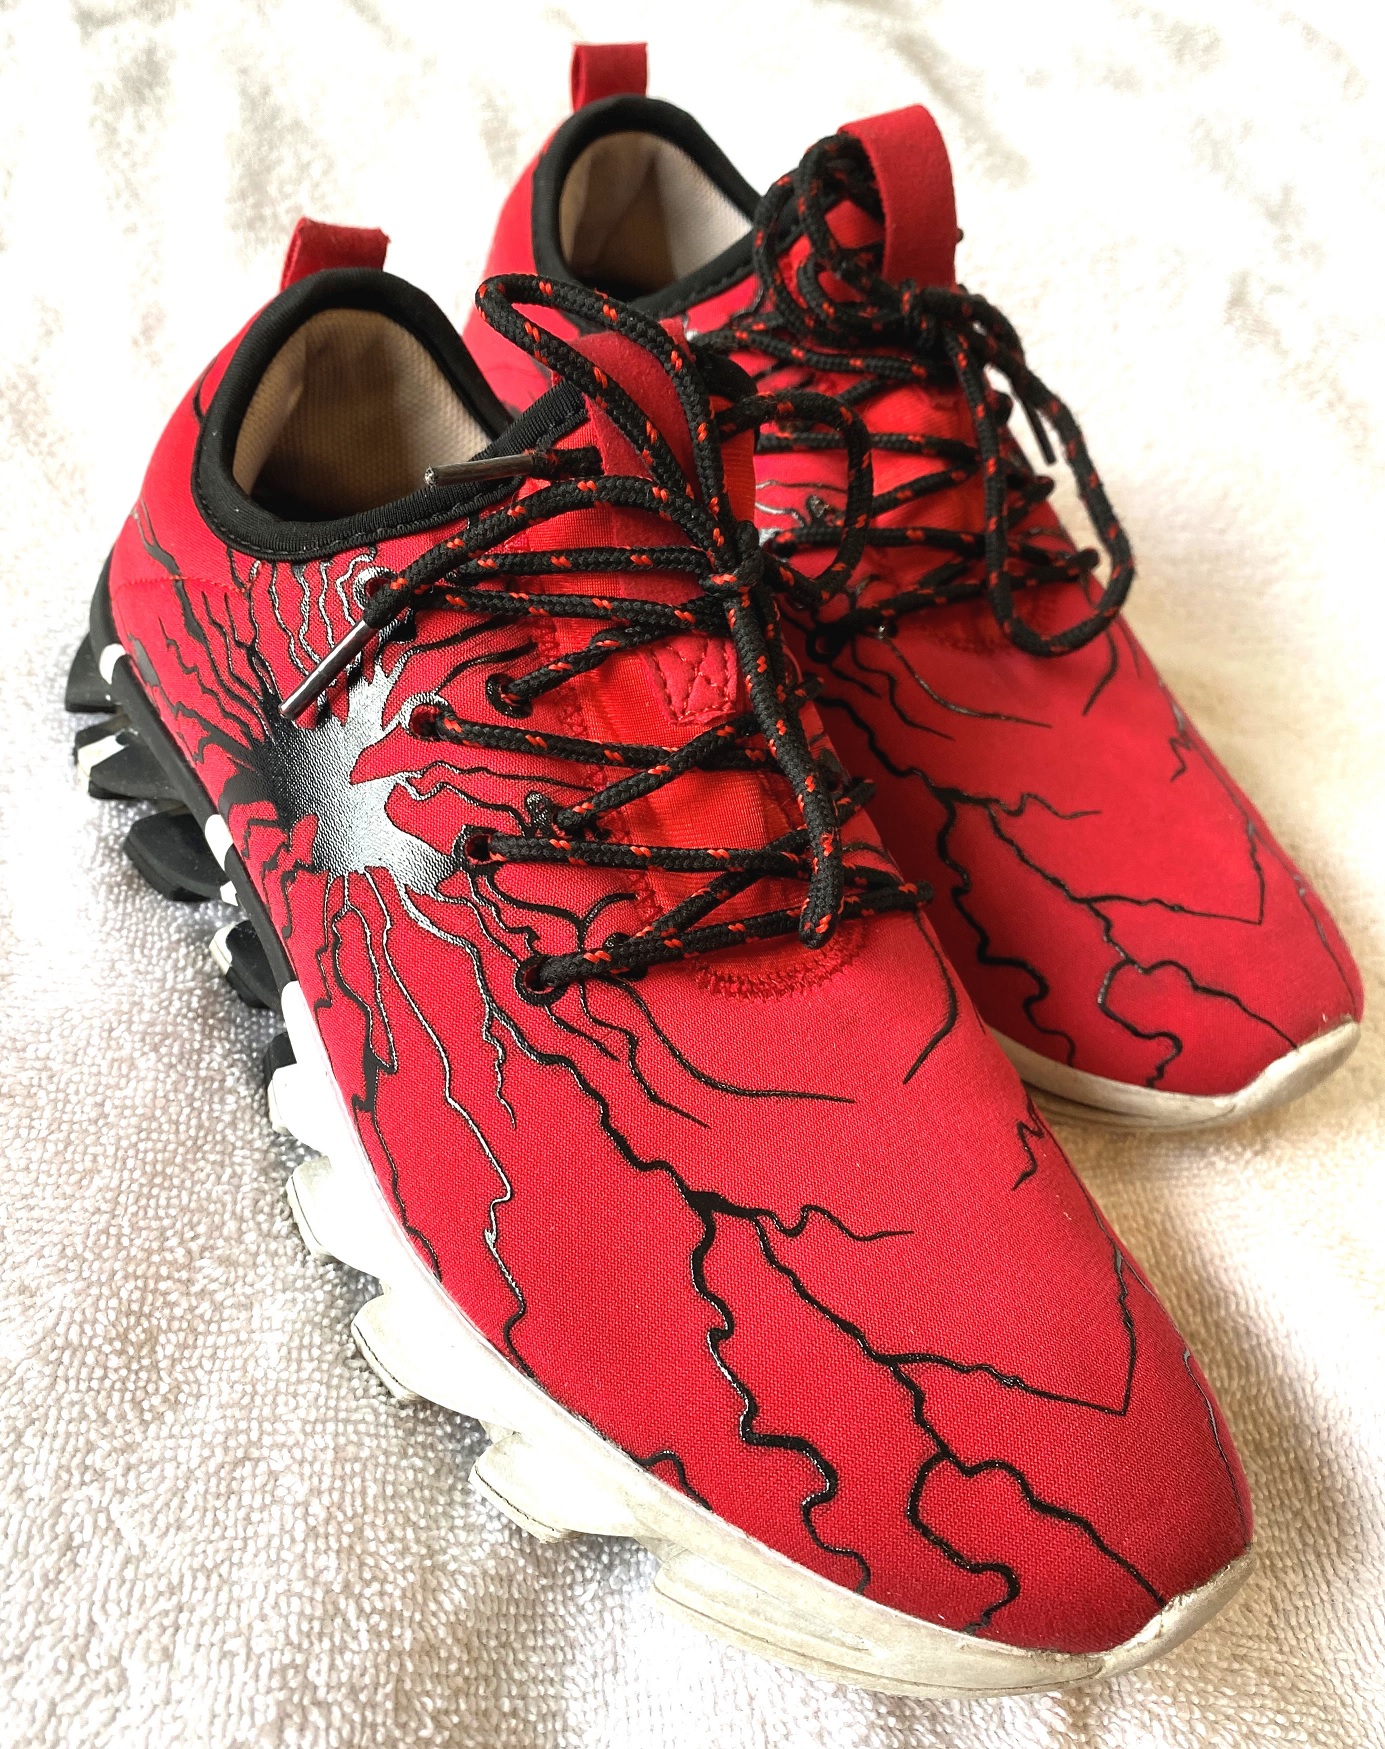 Red and Black Sports Sneakers in The Style of Spiderman